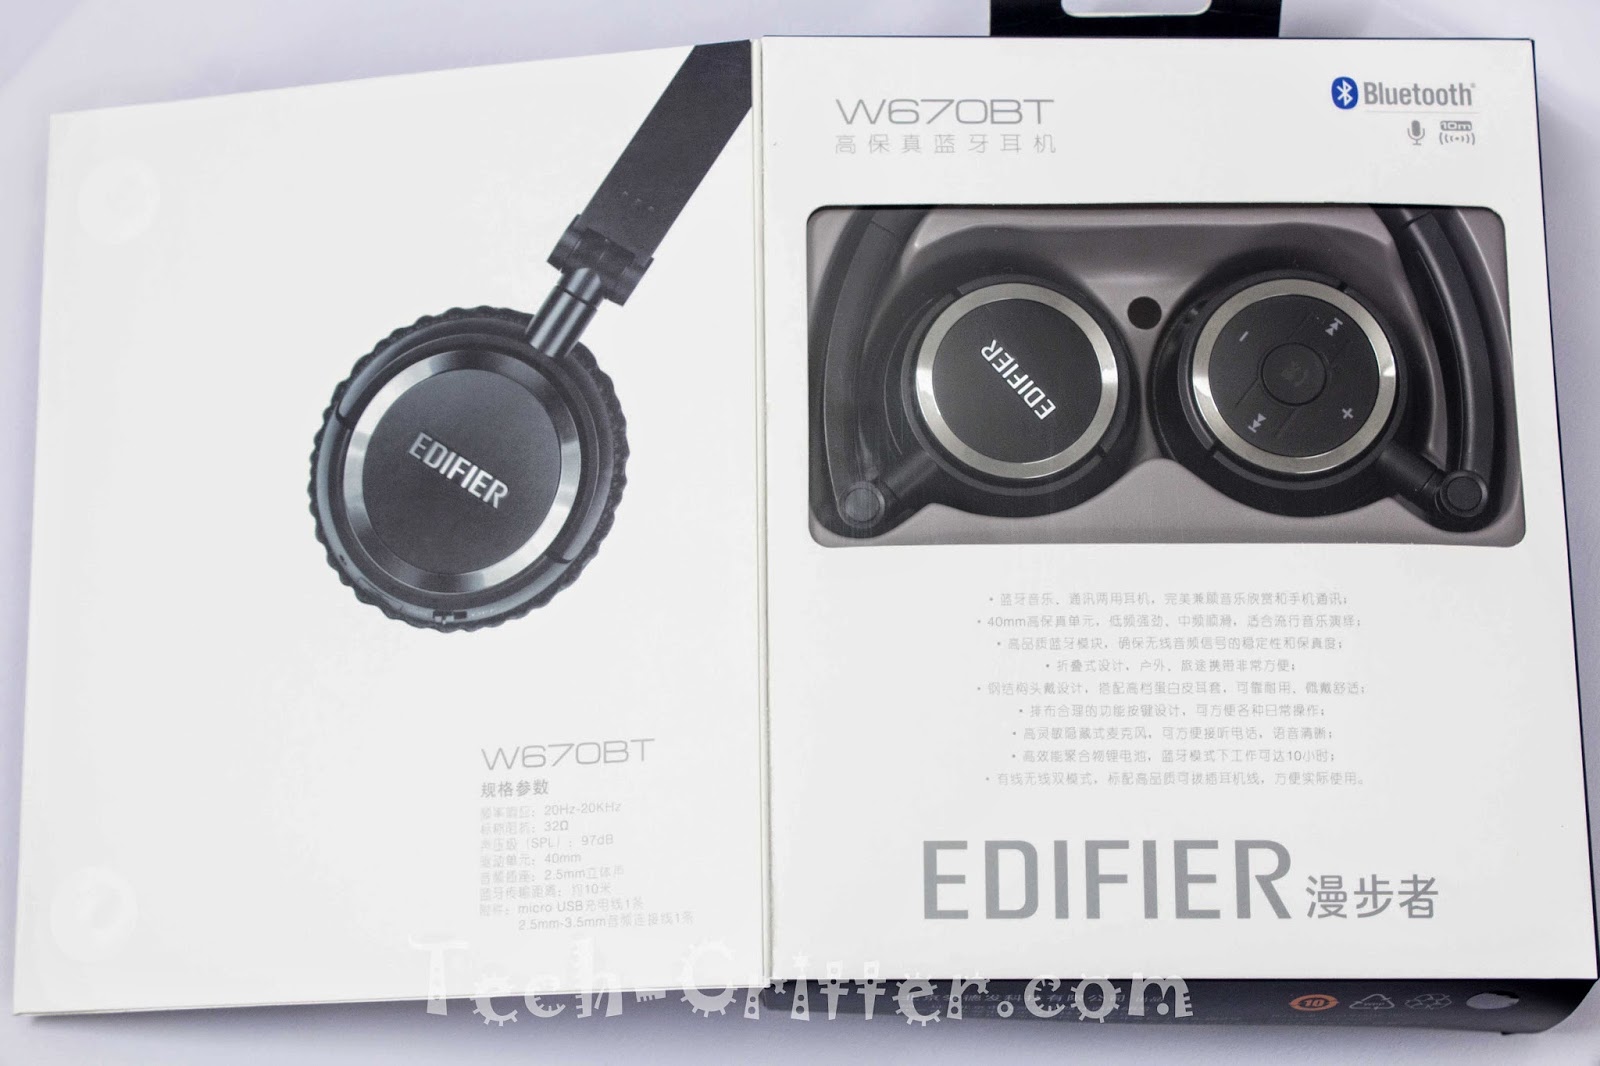 Unboxing & Review: Edifier W670BT Stereo Bluetooth Headset 37